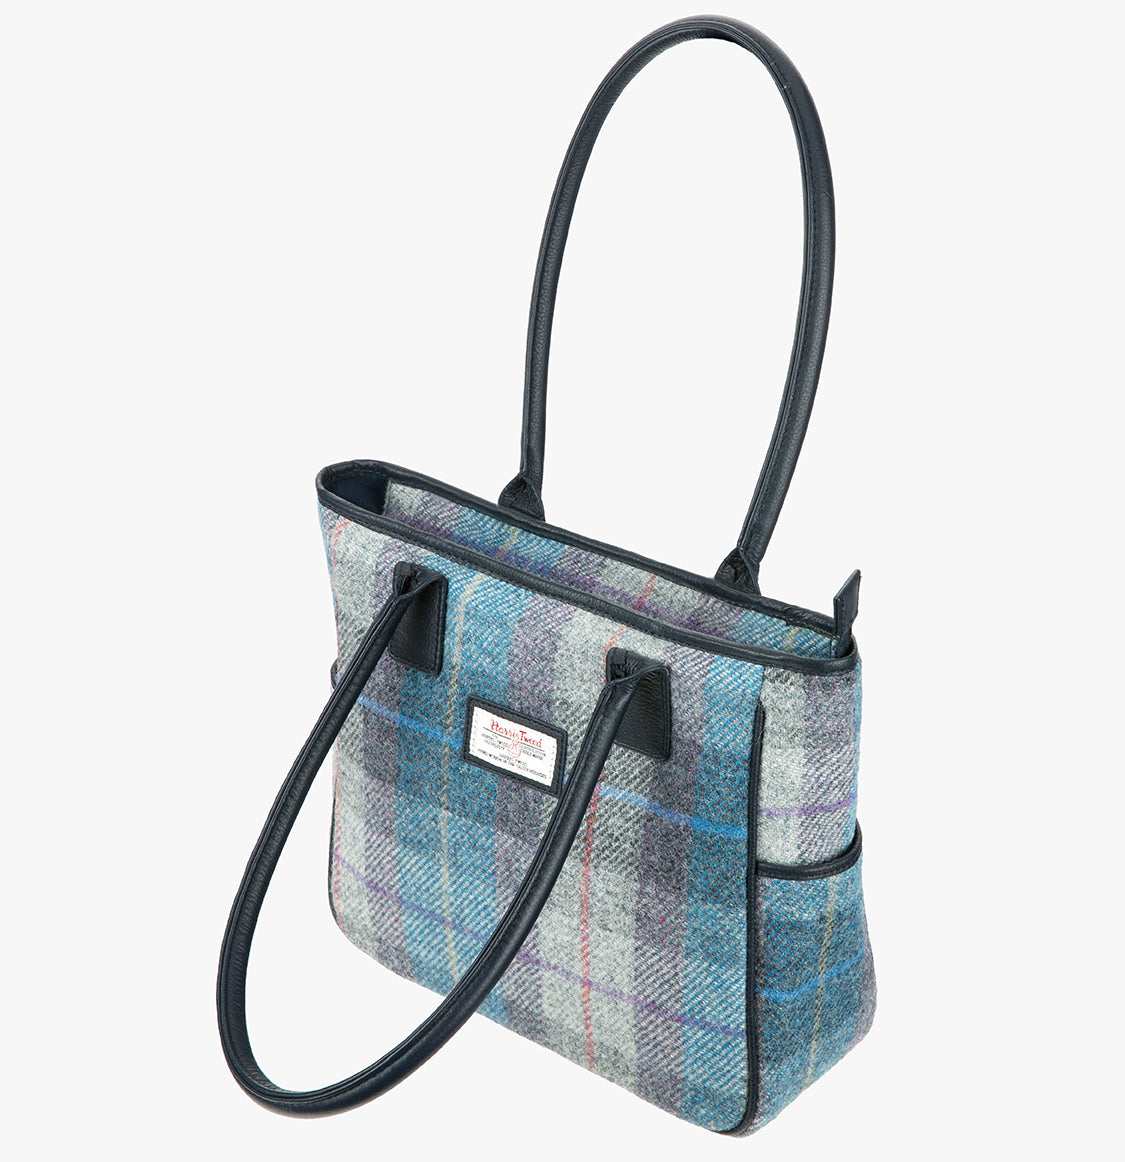 Harris Tweed tote bag with handles that go over the shoulder, it is a pale blue, purple, and grey check. This bag is Lavender Harris Tweed with navy blue leather handles. It has a pocket on each side of the bag trimmed with navy leather. This bag has the front folded over.